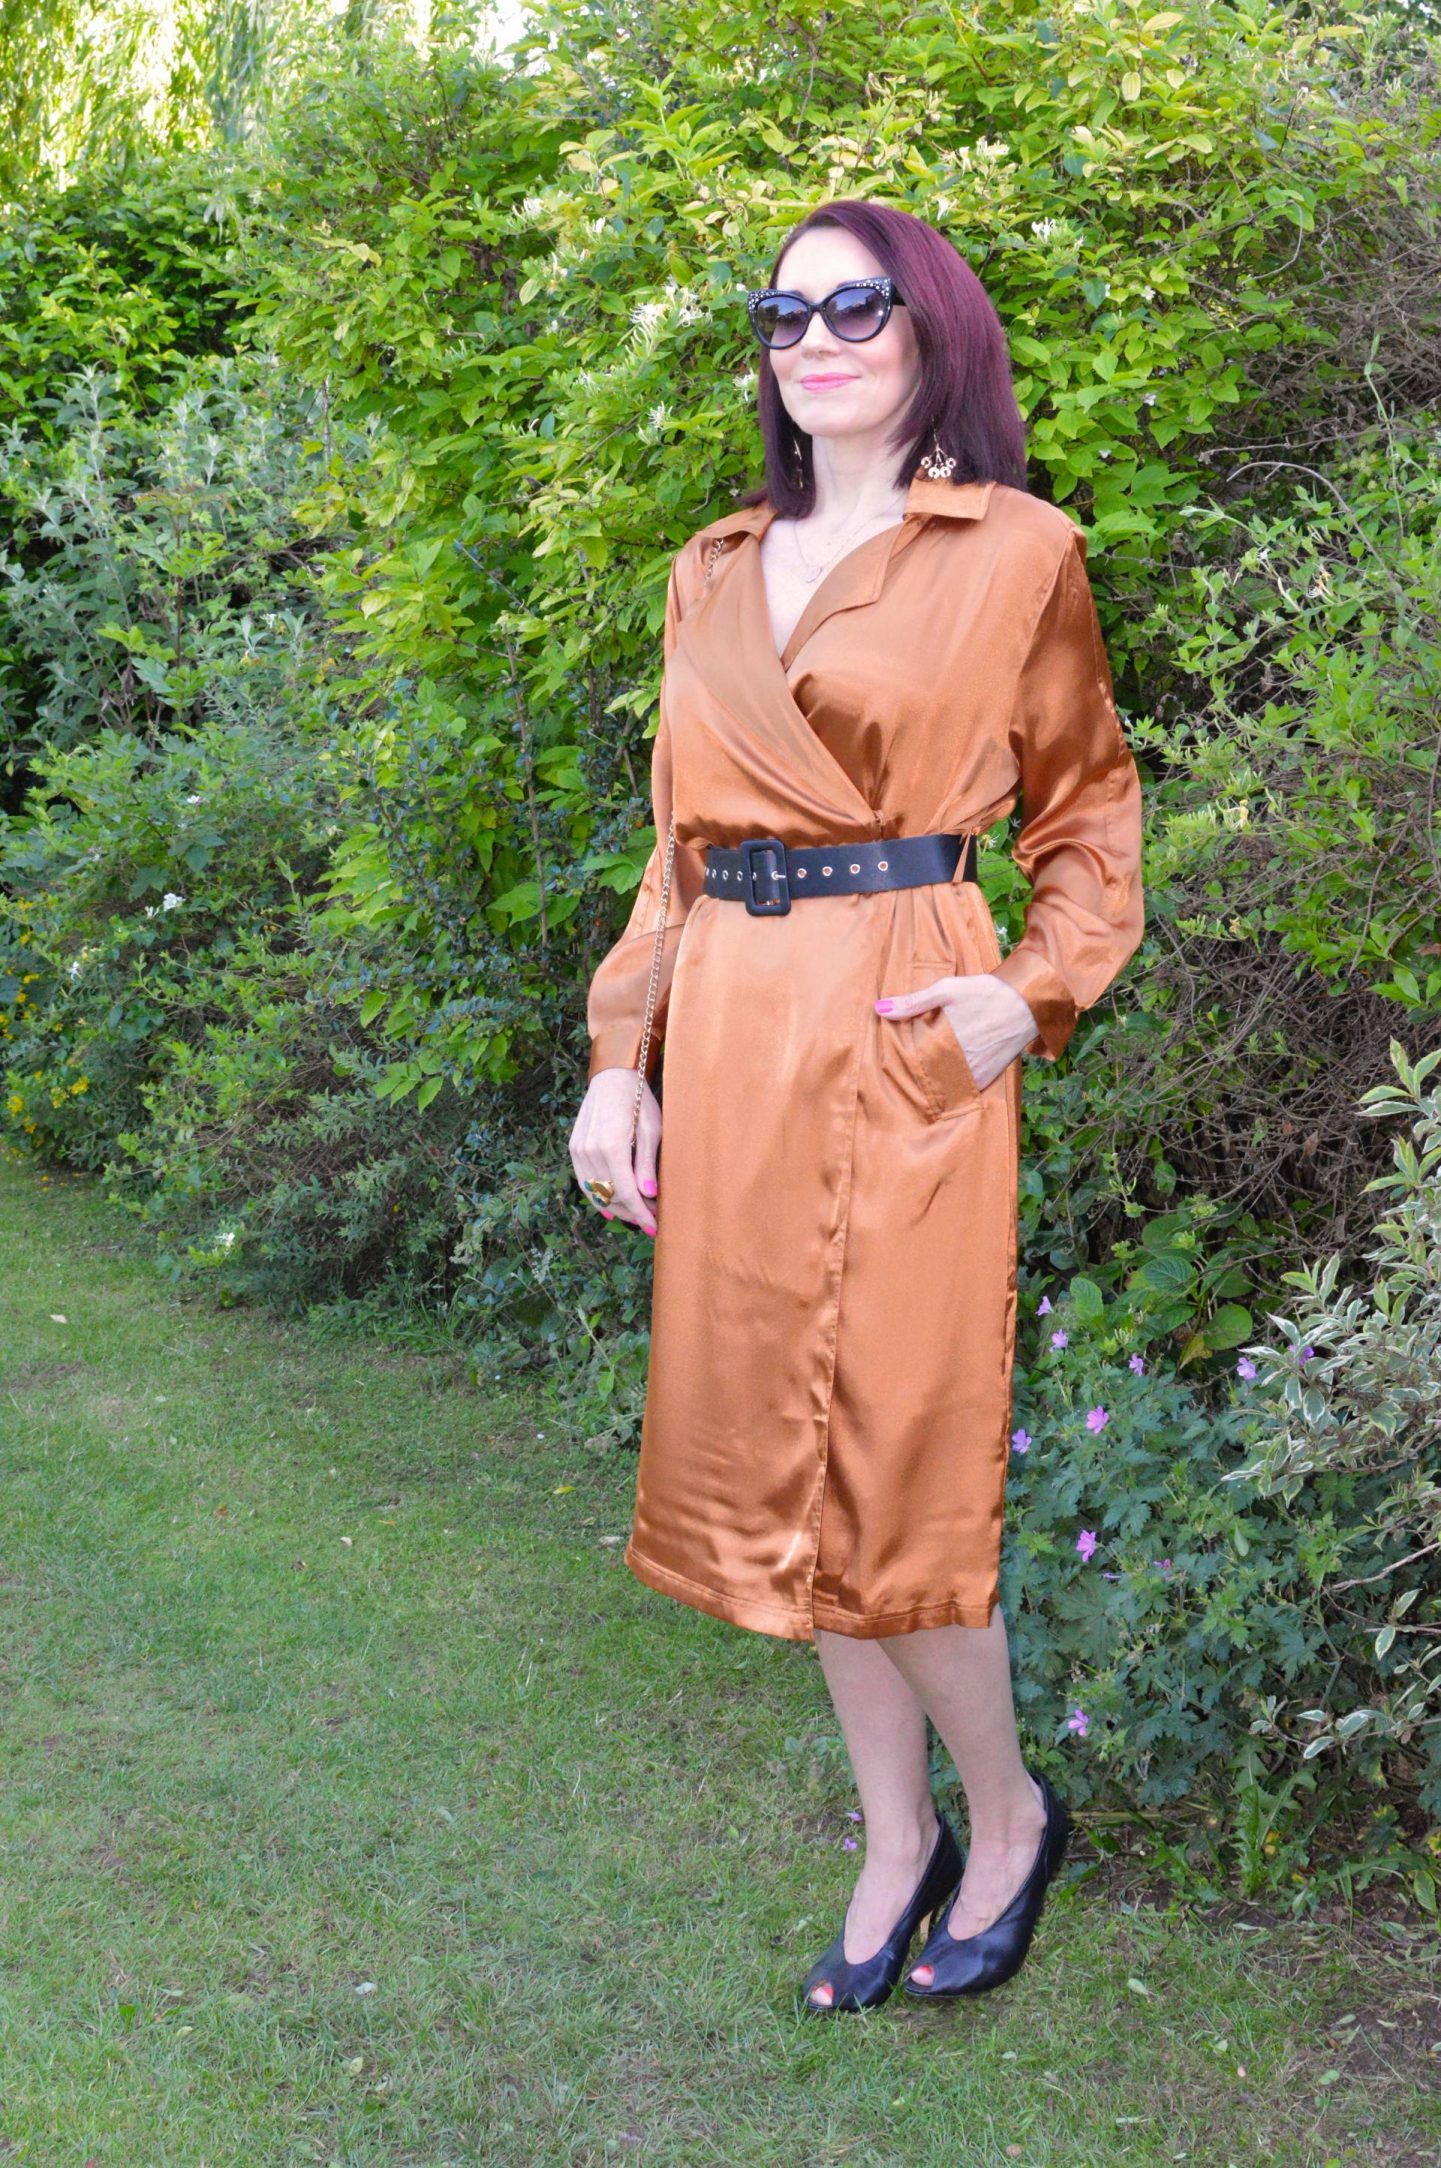 We're Allowed "Out Out" - June's Match Made in Seven, Kitri satin wrap dress